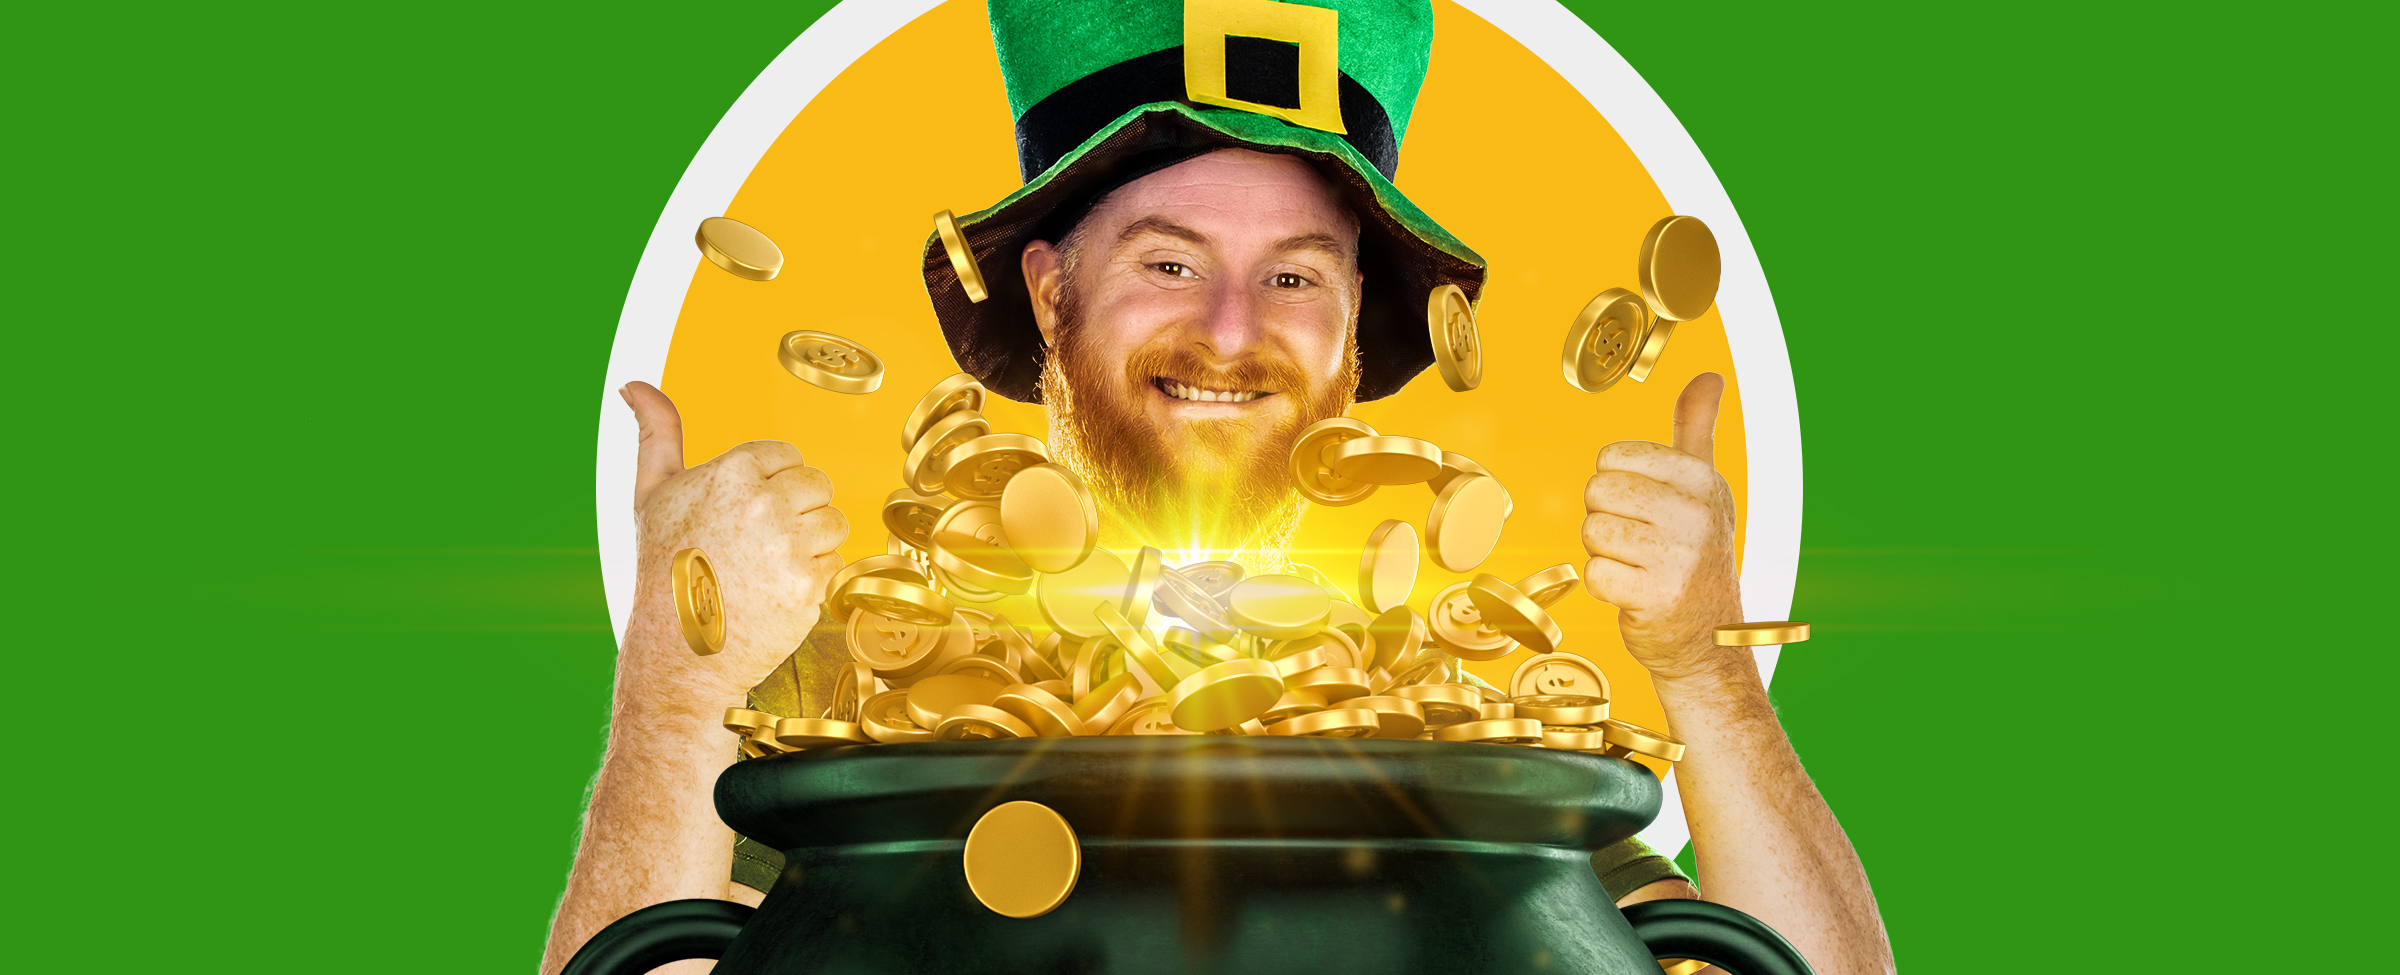 Whether it’s St. Patrick’s Day or a regular Saturday, Joe’s pulled together a bunch of his favourite pokie games to get into the spirit with.